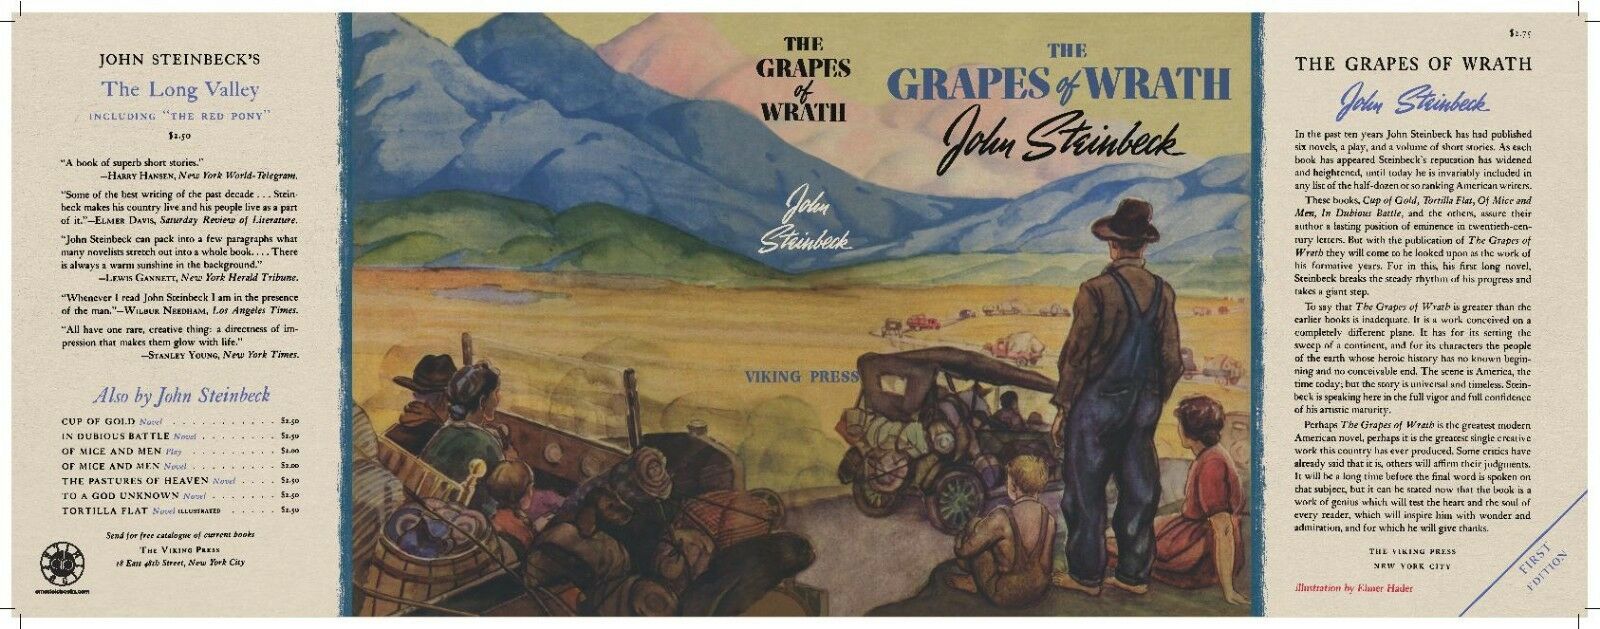 Facsimile Dust Jacket ONLY John Steinbeck The Grapes of Wrath 1st Edition 1939